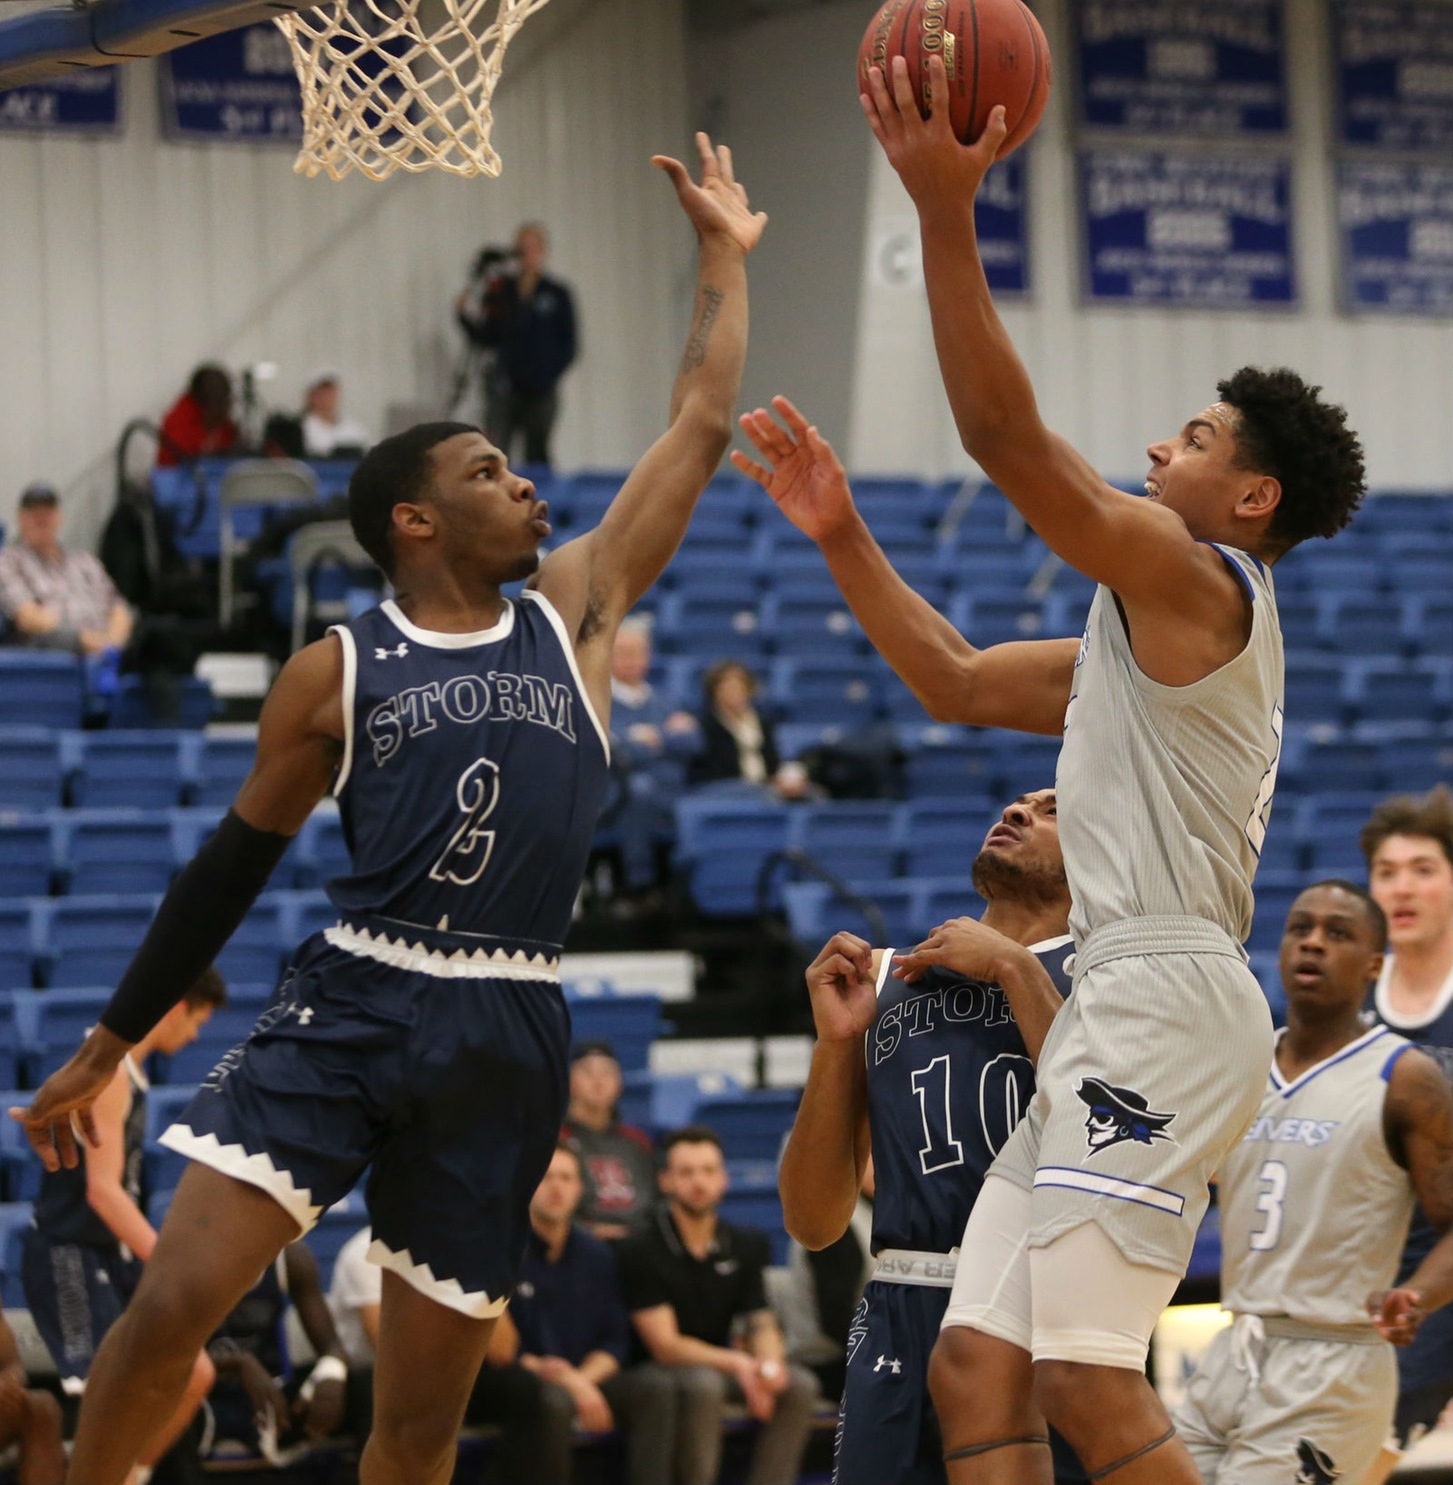 Josiah Strong's 24 points led all scorers in the Reivers 97-88 road victory over Southeast Tuesday (1/7) evening in Beatrice, NE.